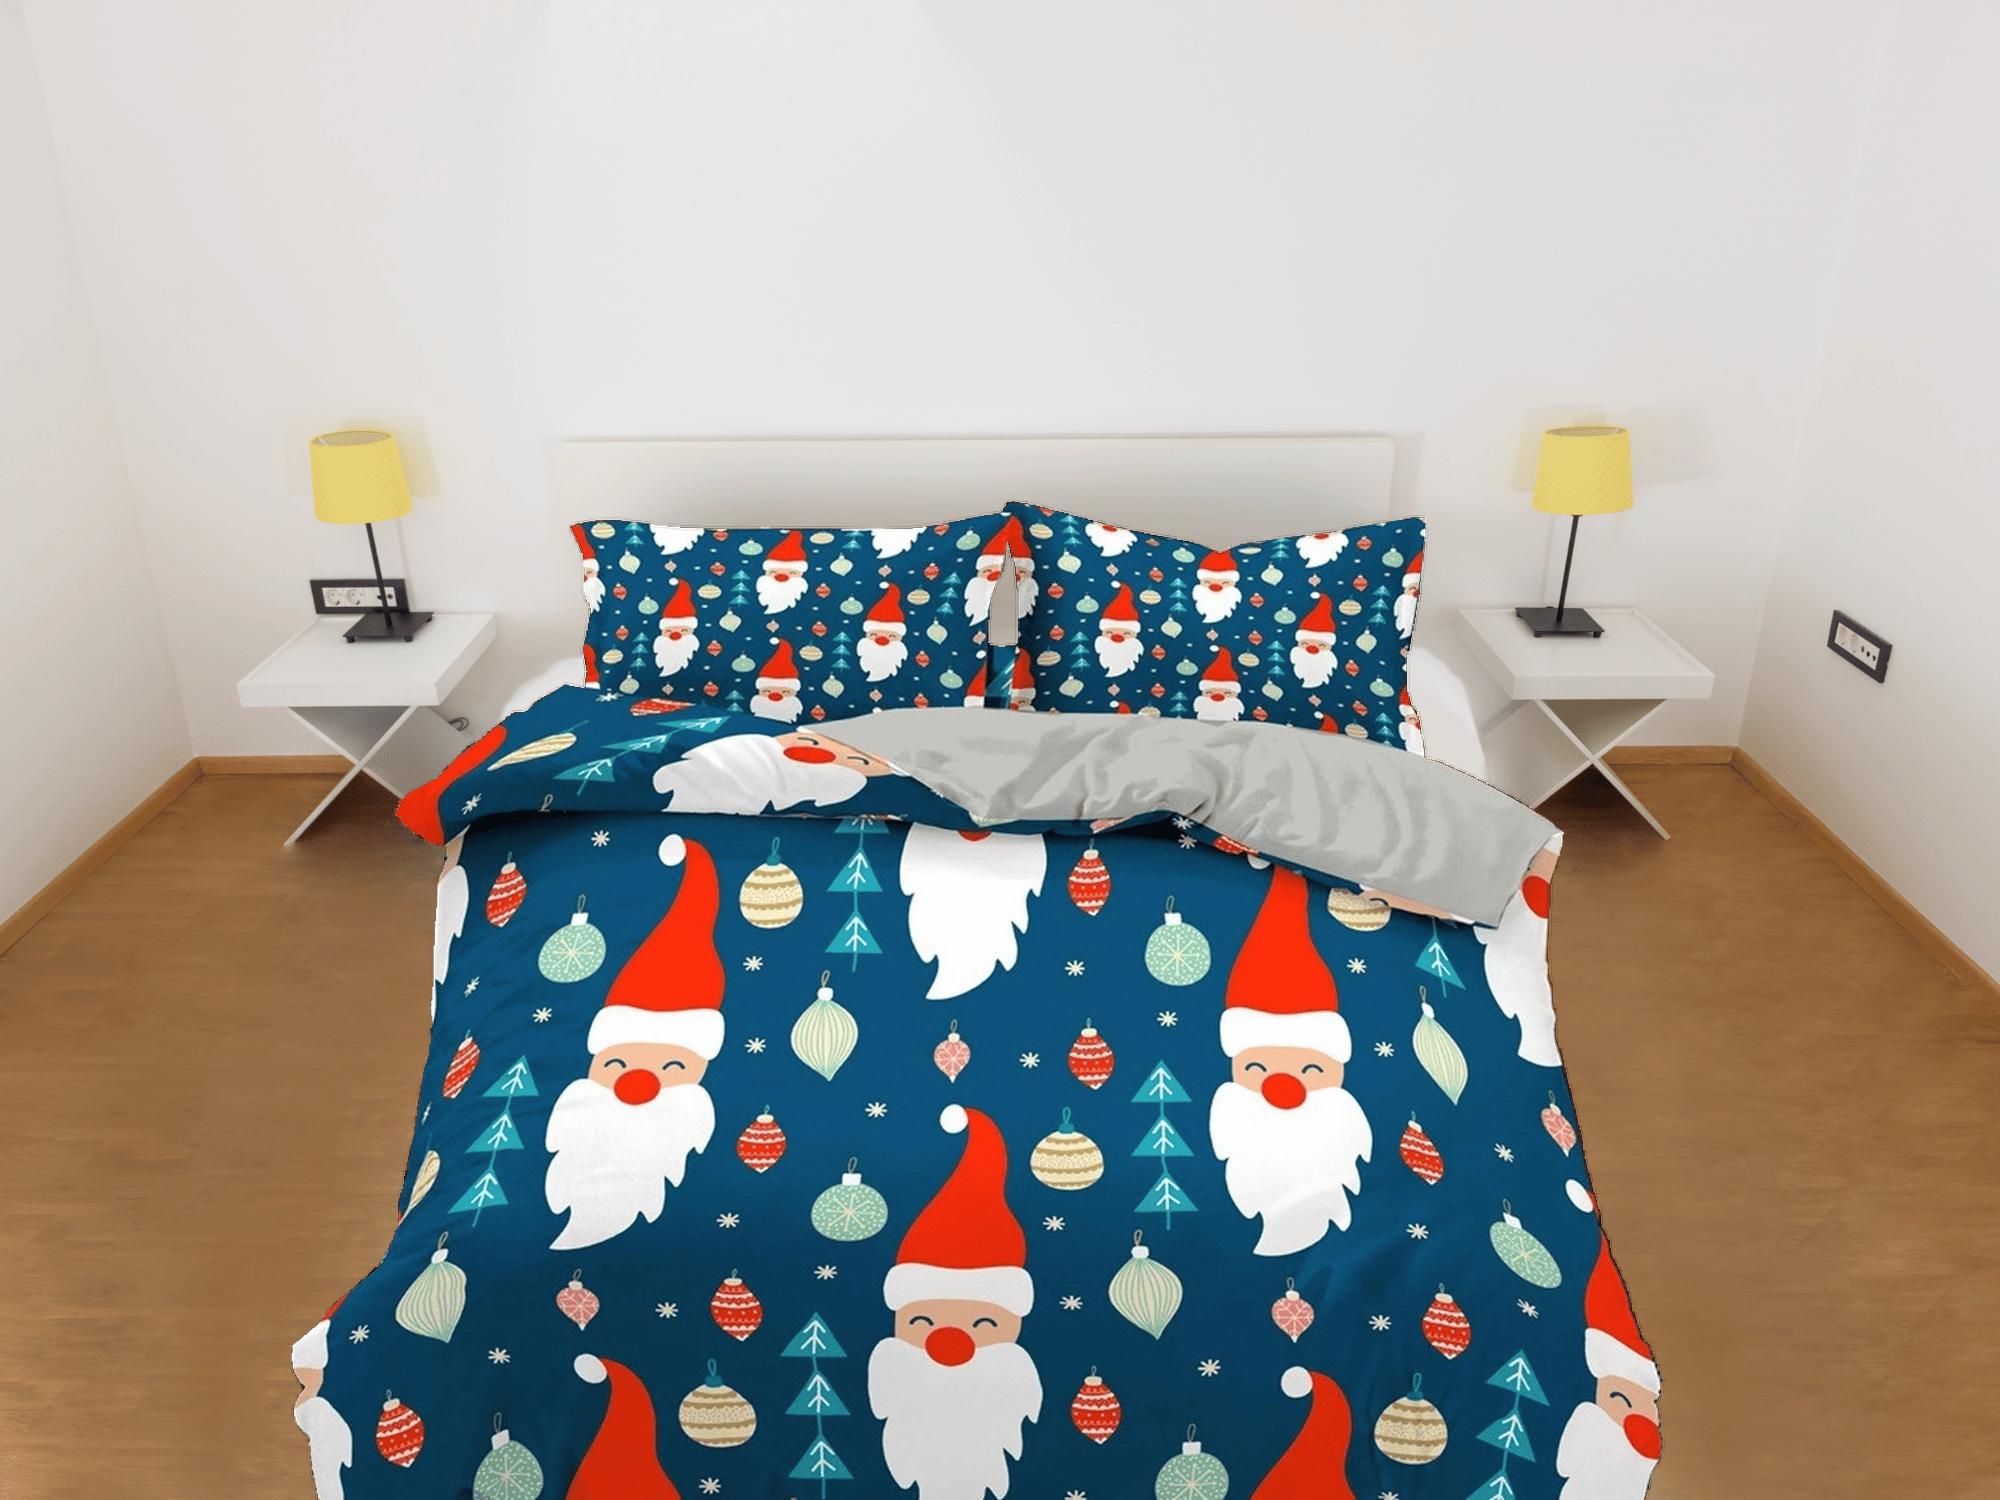 daintyduvet Cute Santa Claus pattern Christmas bedding & pillowcase holiday gift duvet cover king queen full twin toddler bedding baby Christmas decor